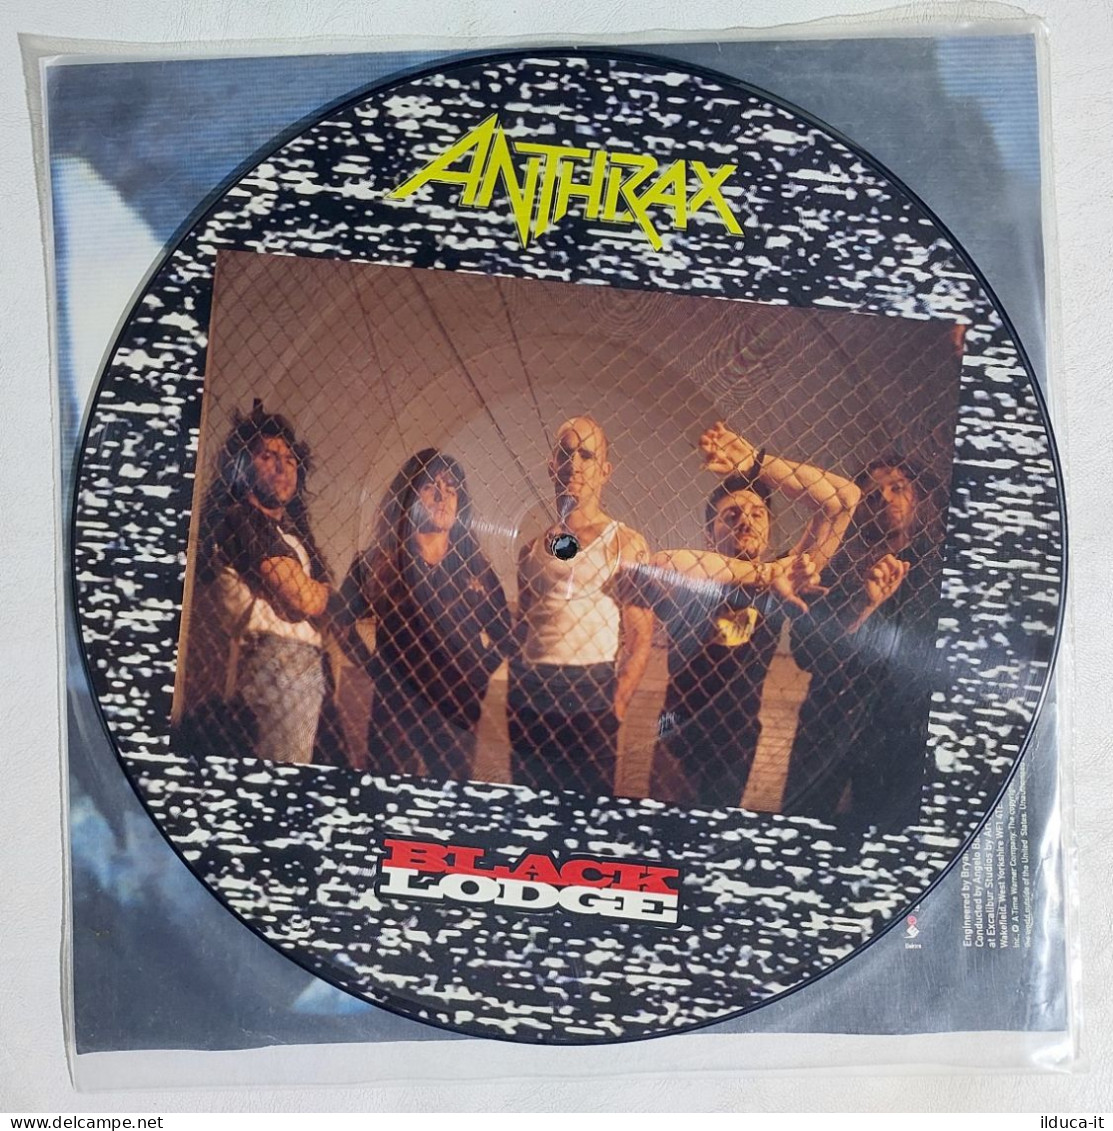 I114357 LP 33 Giri Picture Disc Limited Edition - Anthrax - Black Lodge - 1993 - Limited Editions